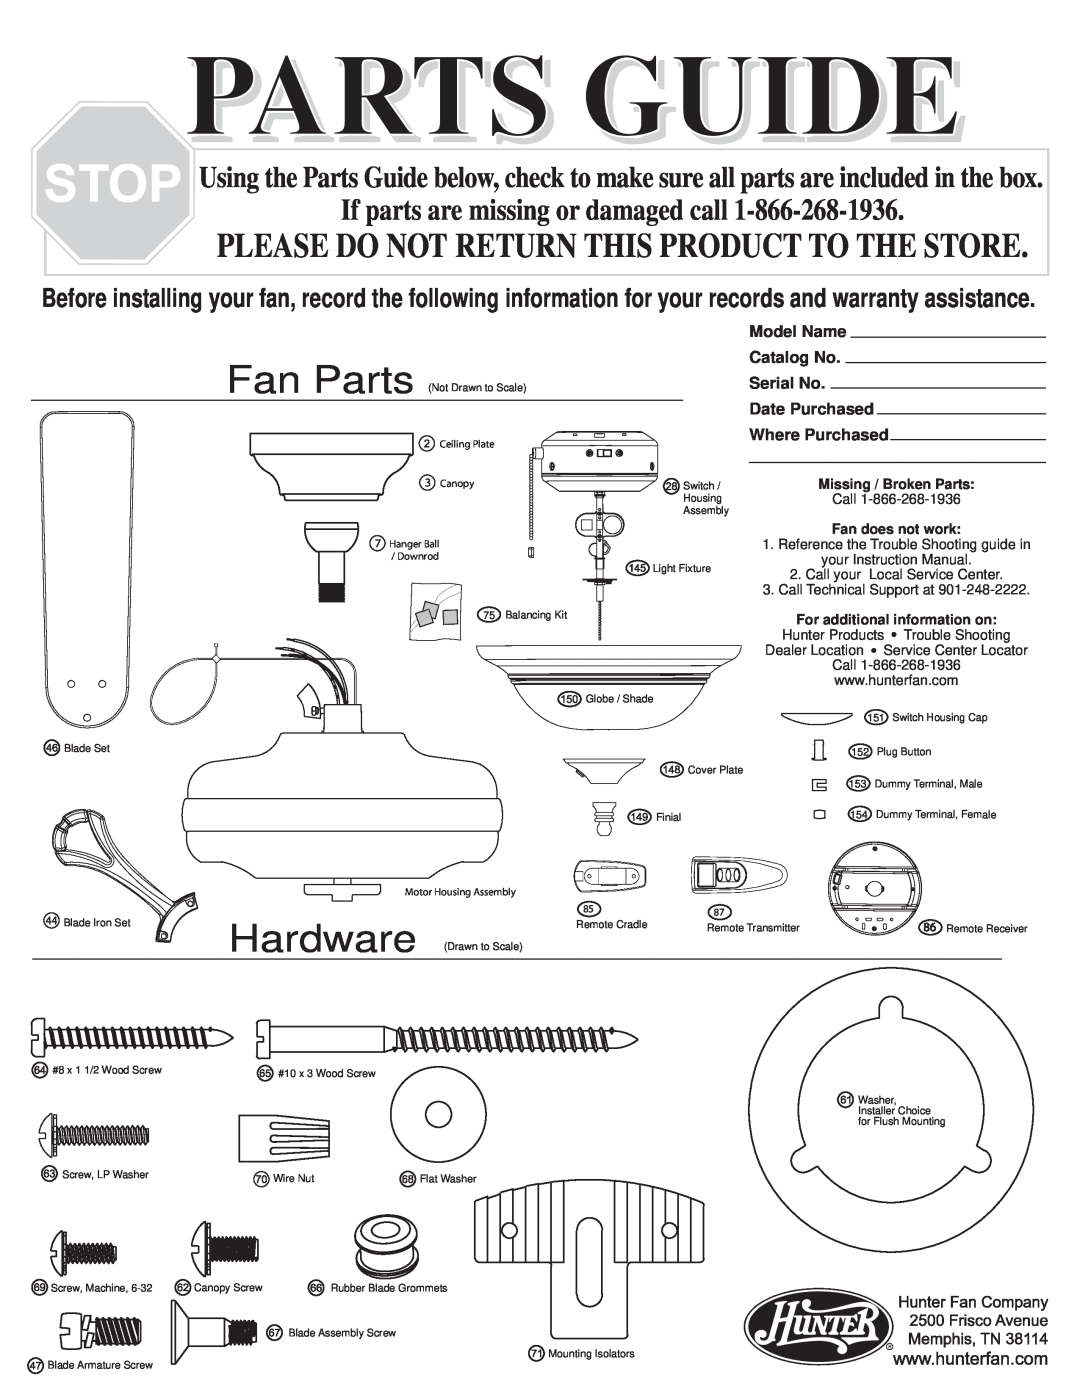 Hunter Fan 27576 warranty Parts Guide, Hardware, If parts are missing or damaged call, Model Name, Catalog No, Serial No 